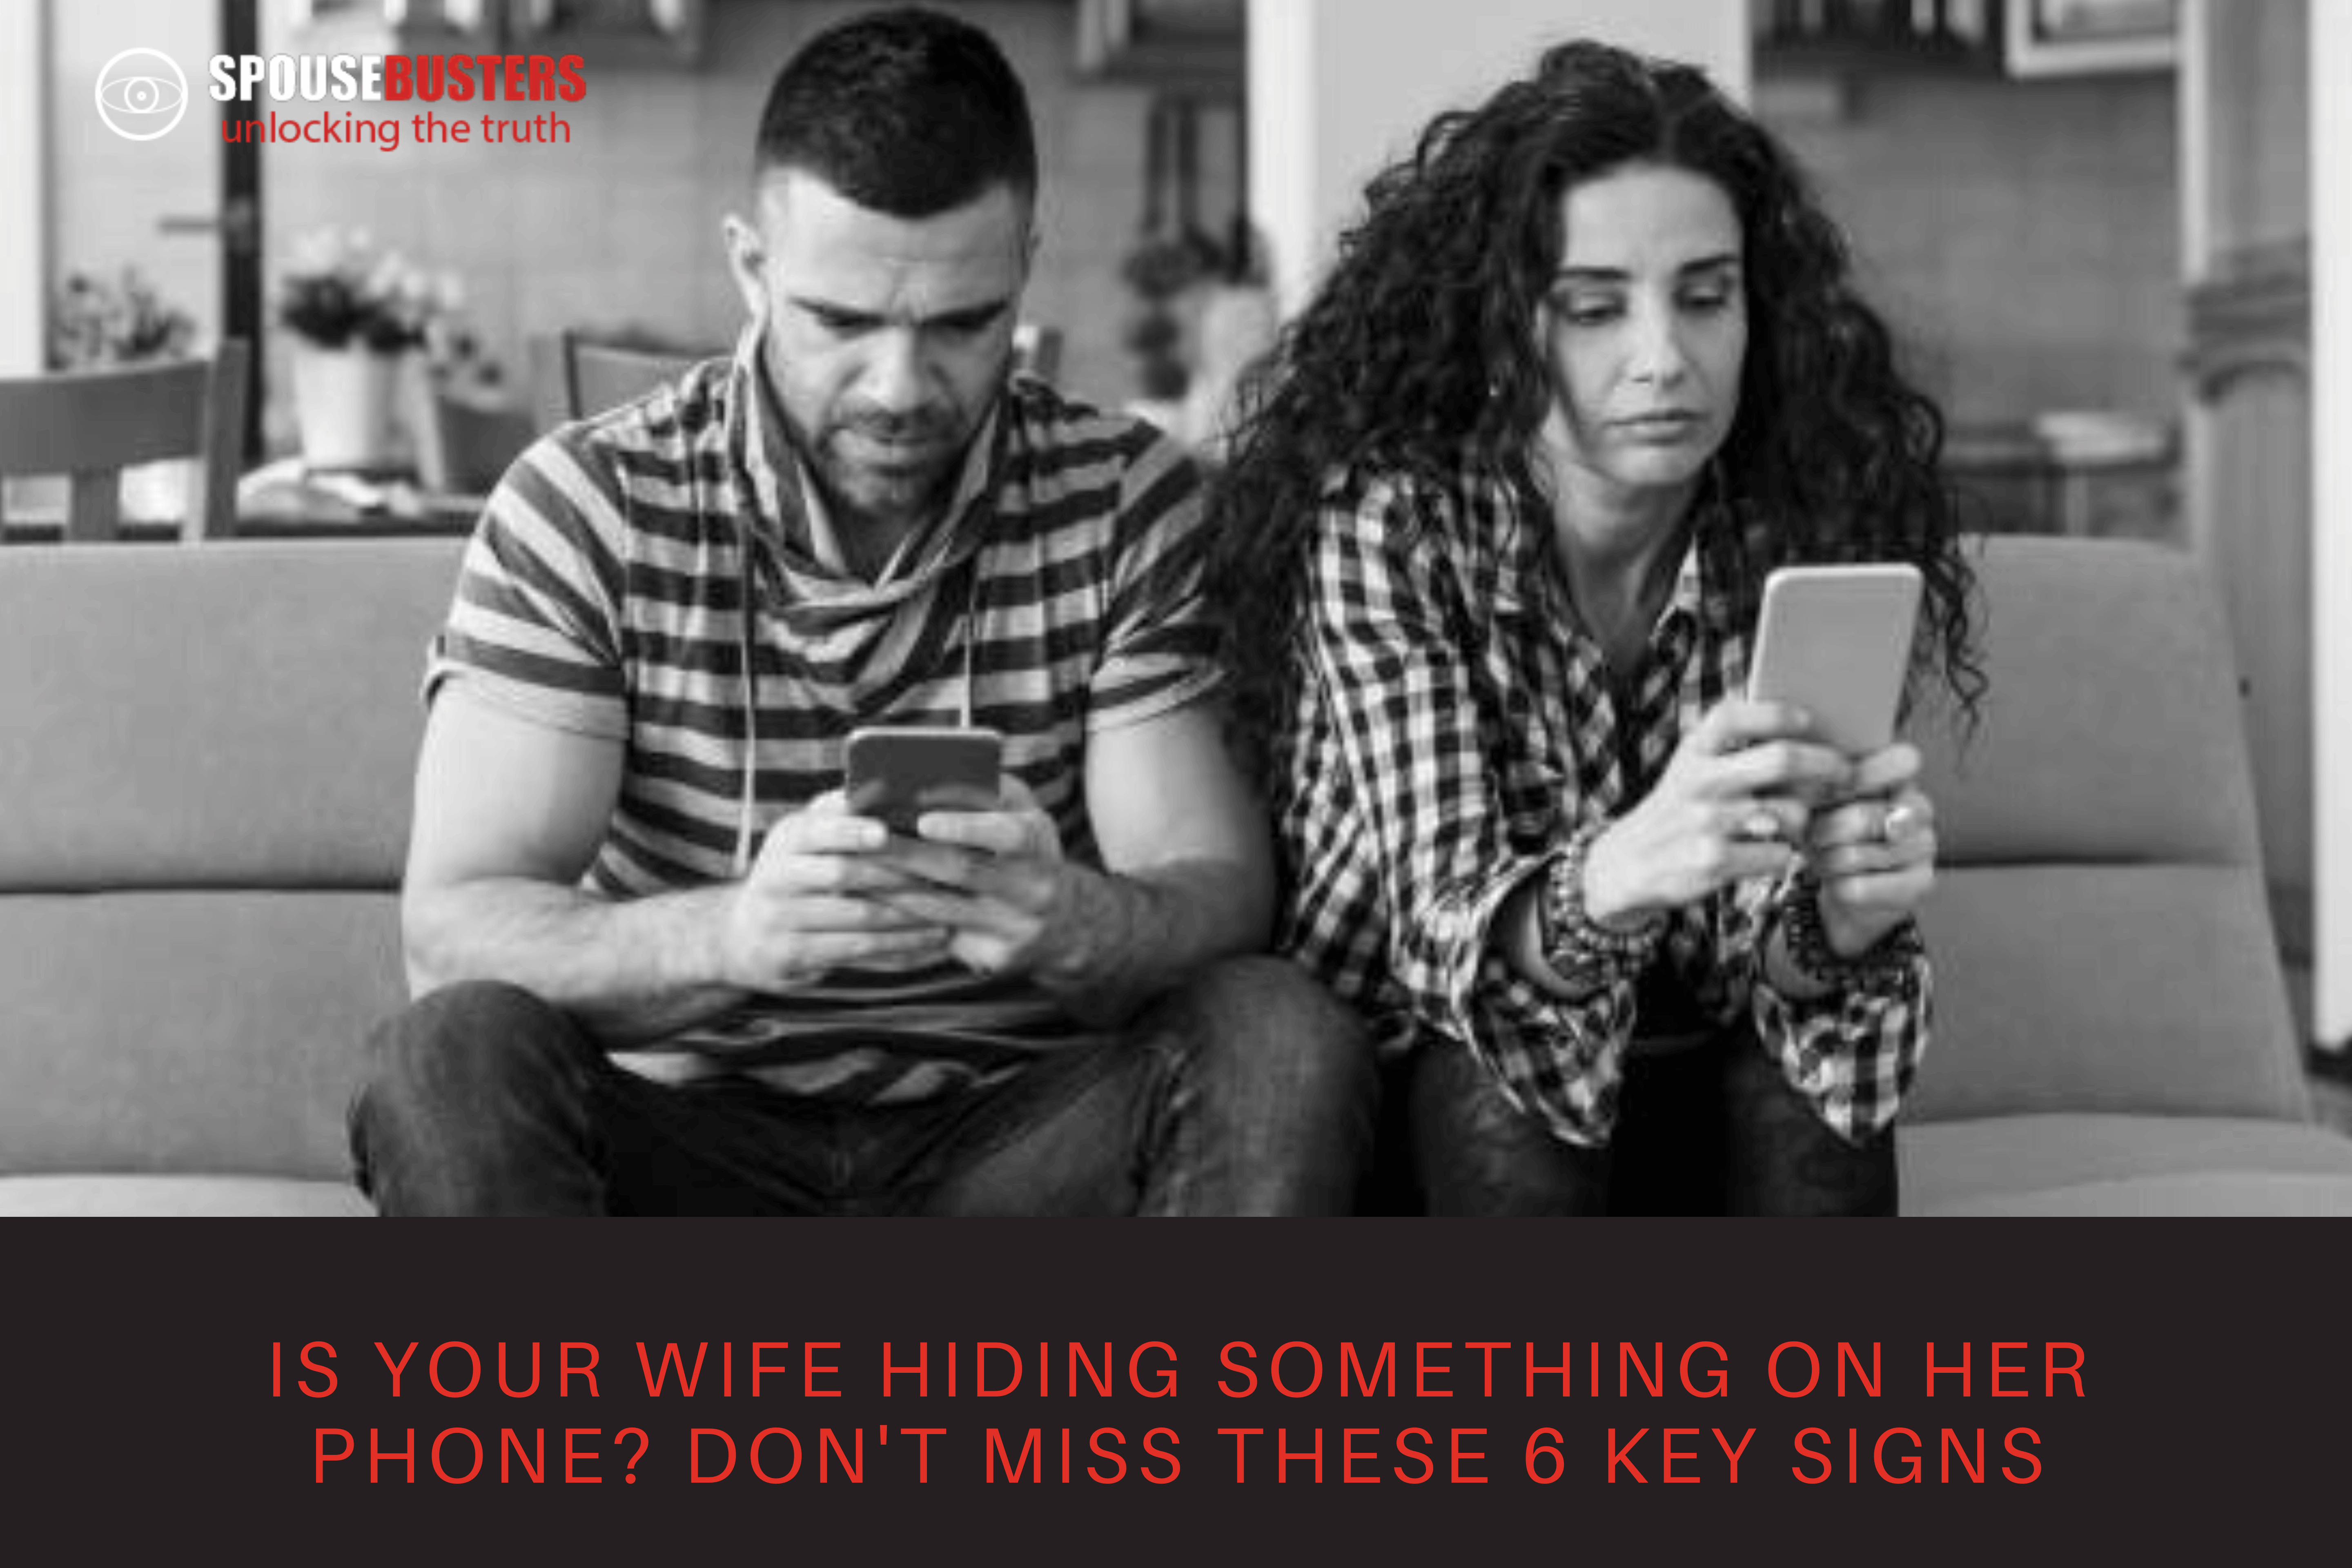 Cheating Wife on Phone? Here Are 6 Key Signs To Look For